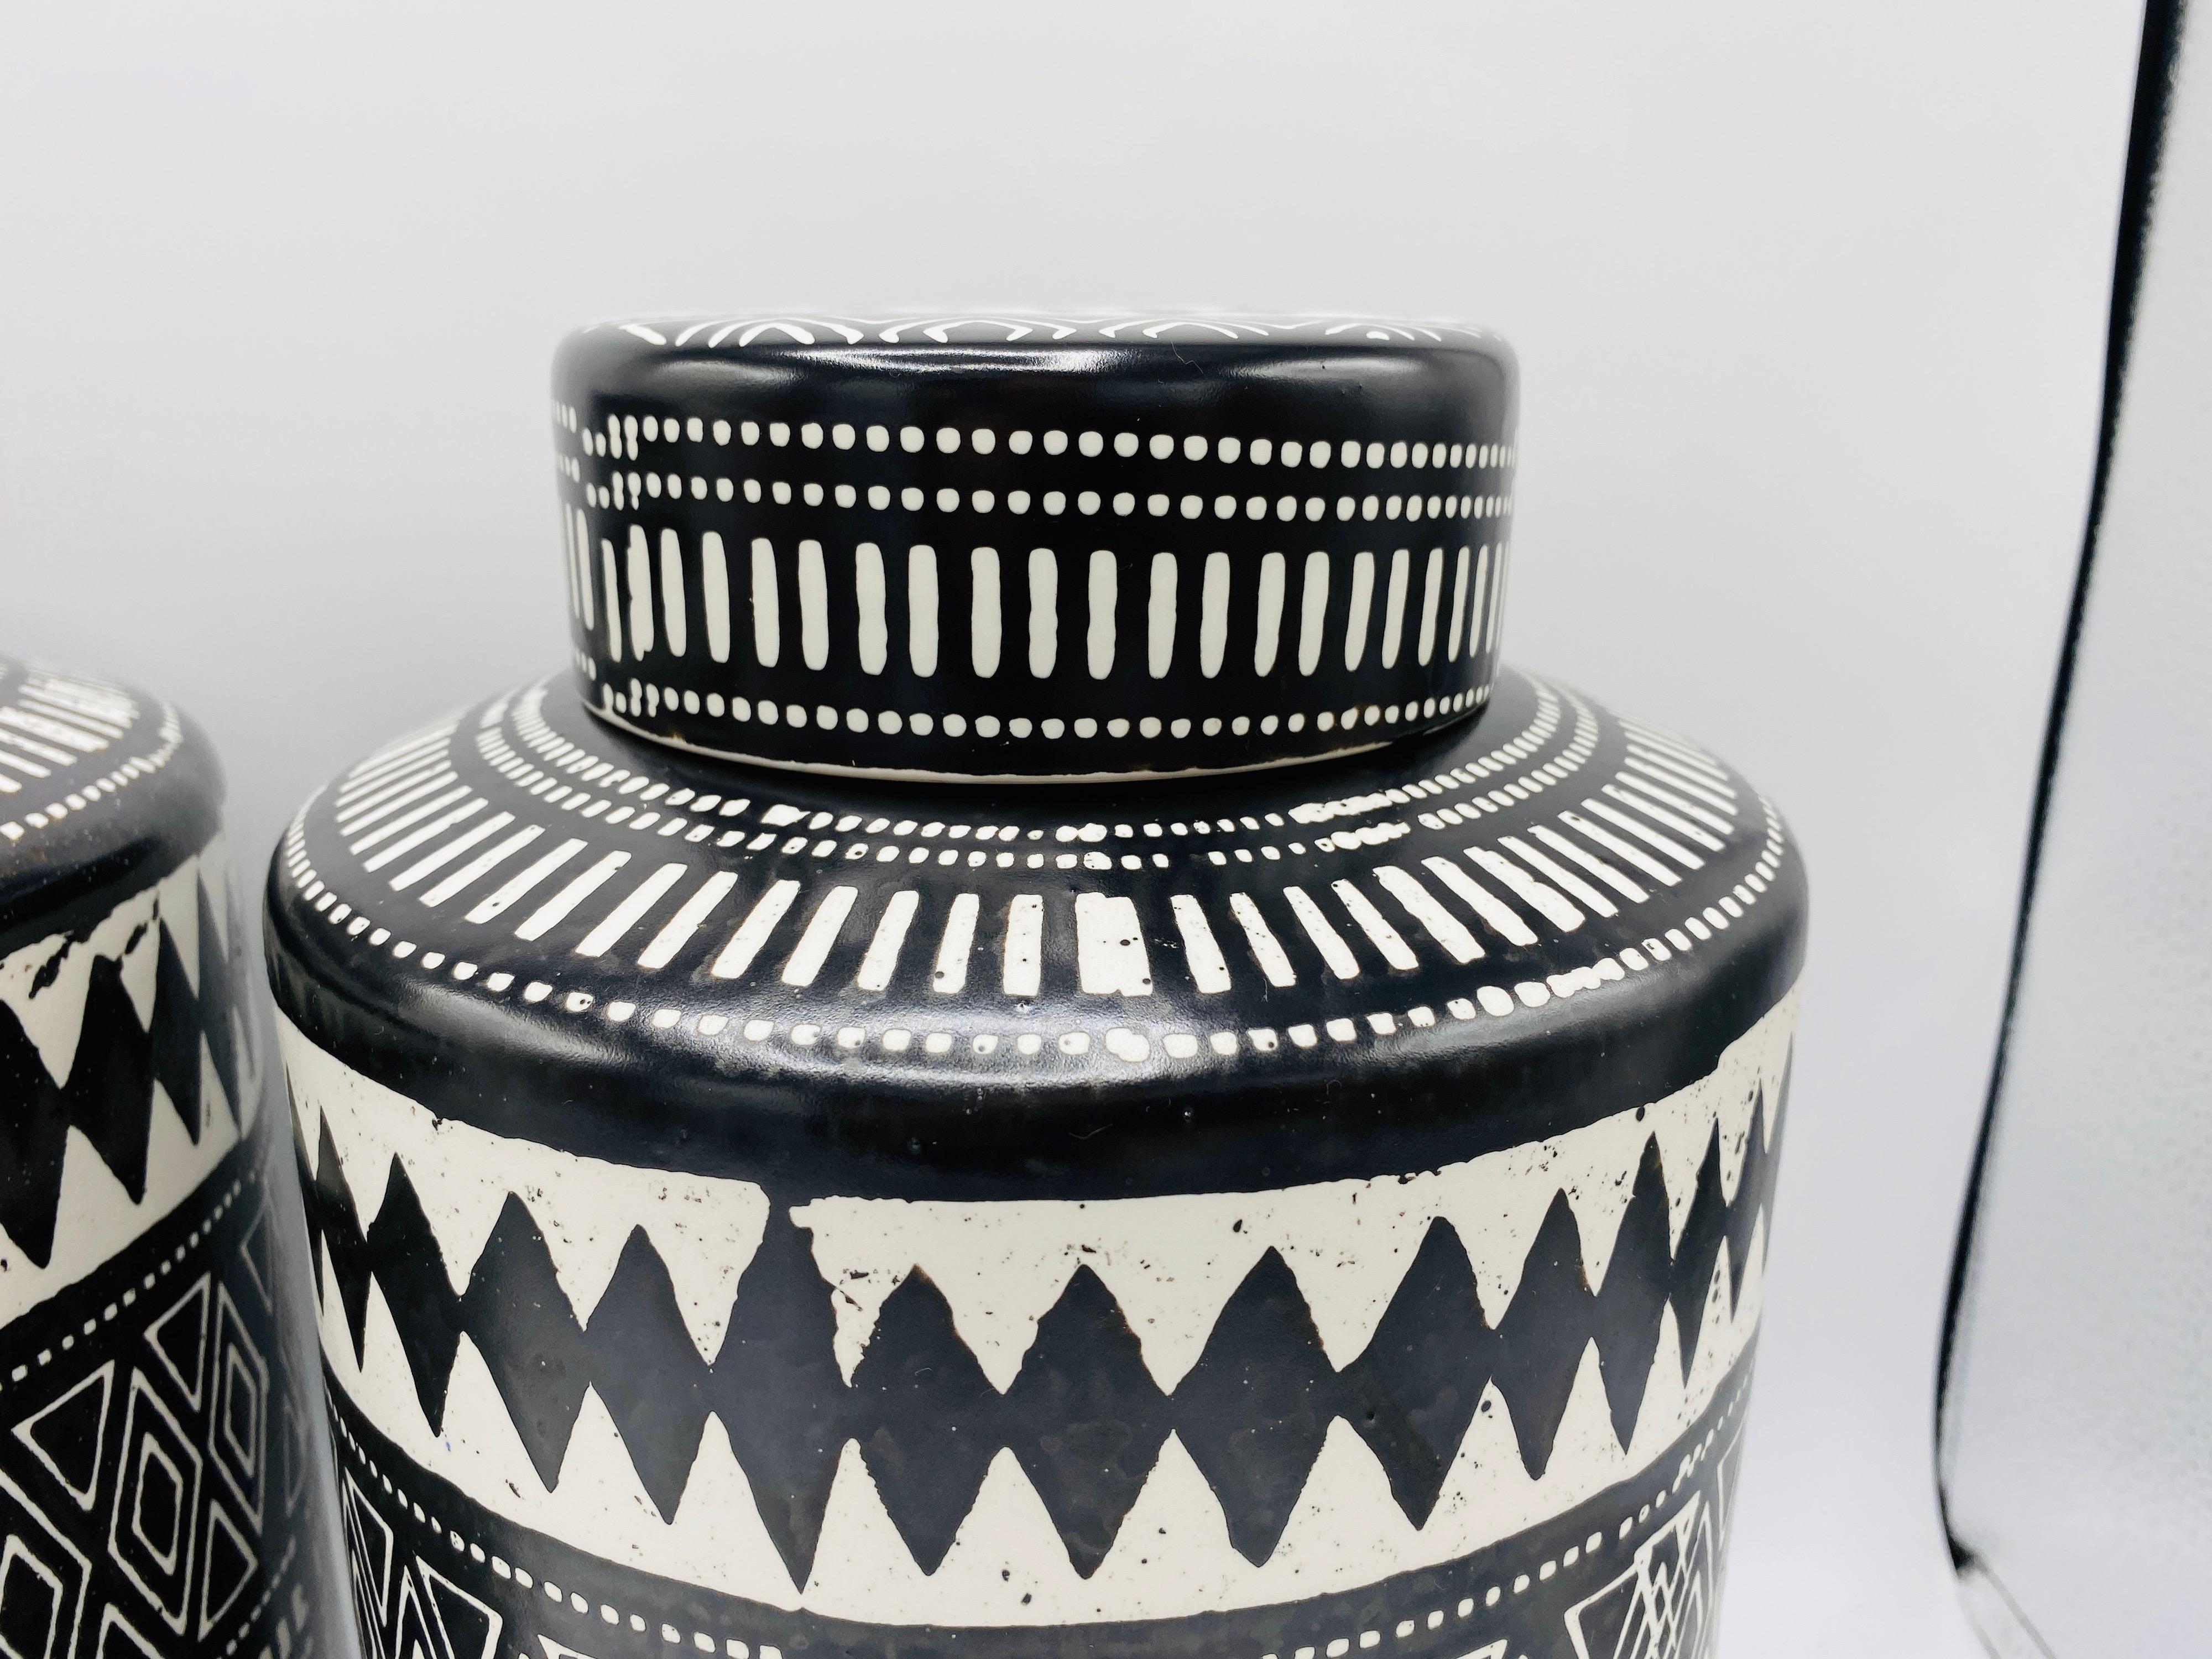 Bohemian Black and White Ceramic Ginger Jar Canisters, Pair In Good Condition For Sale In Richmond, VA